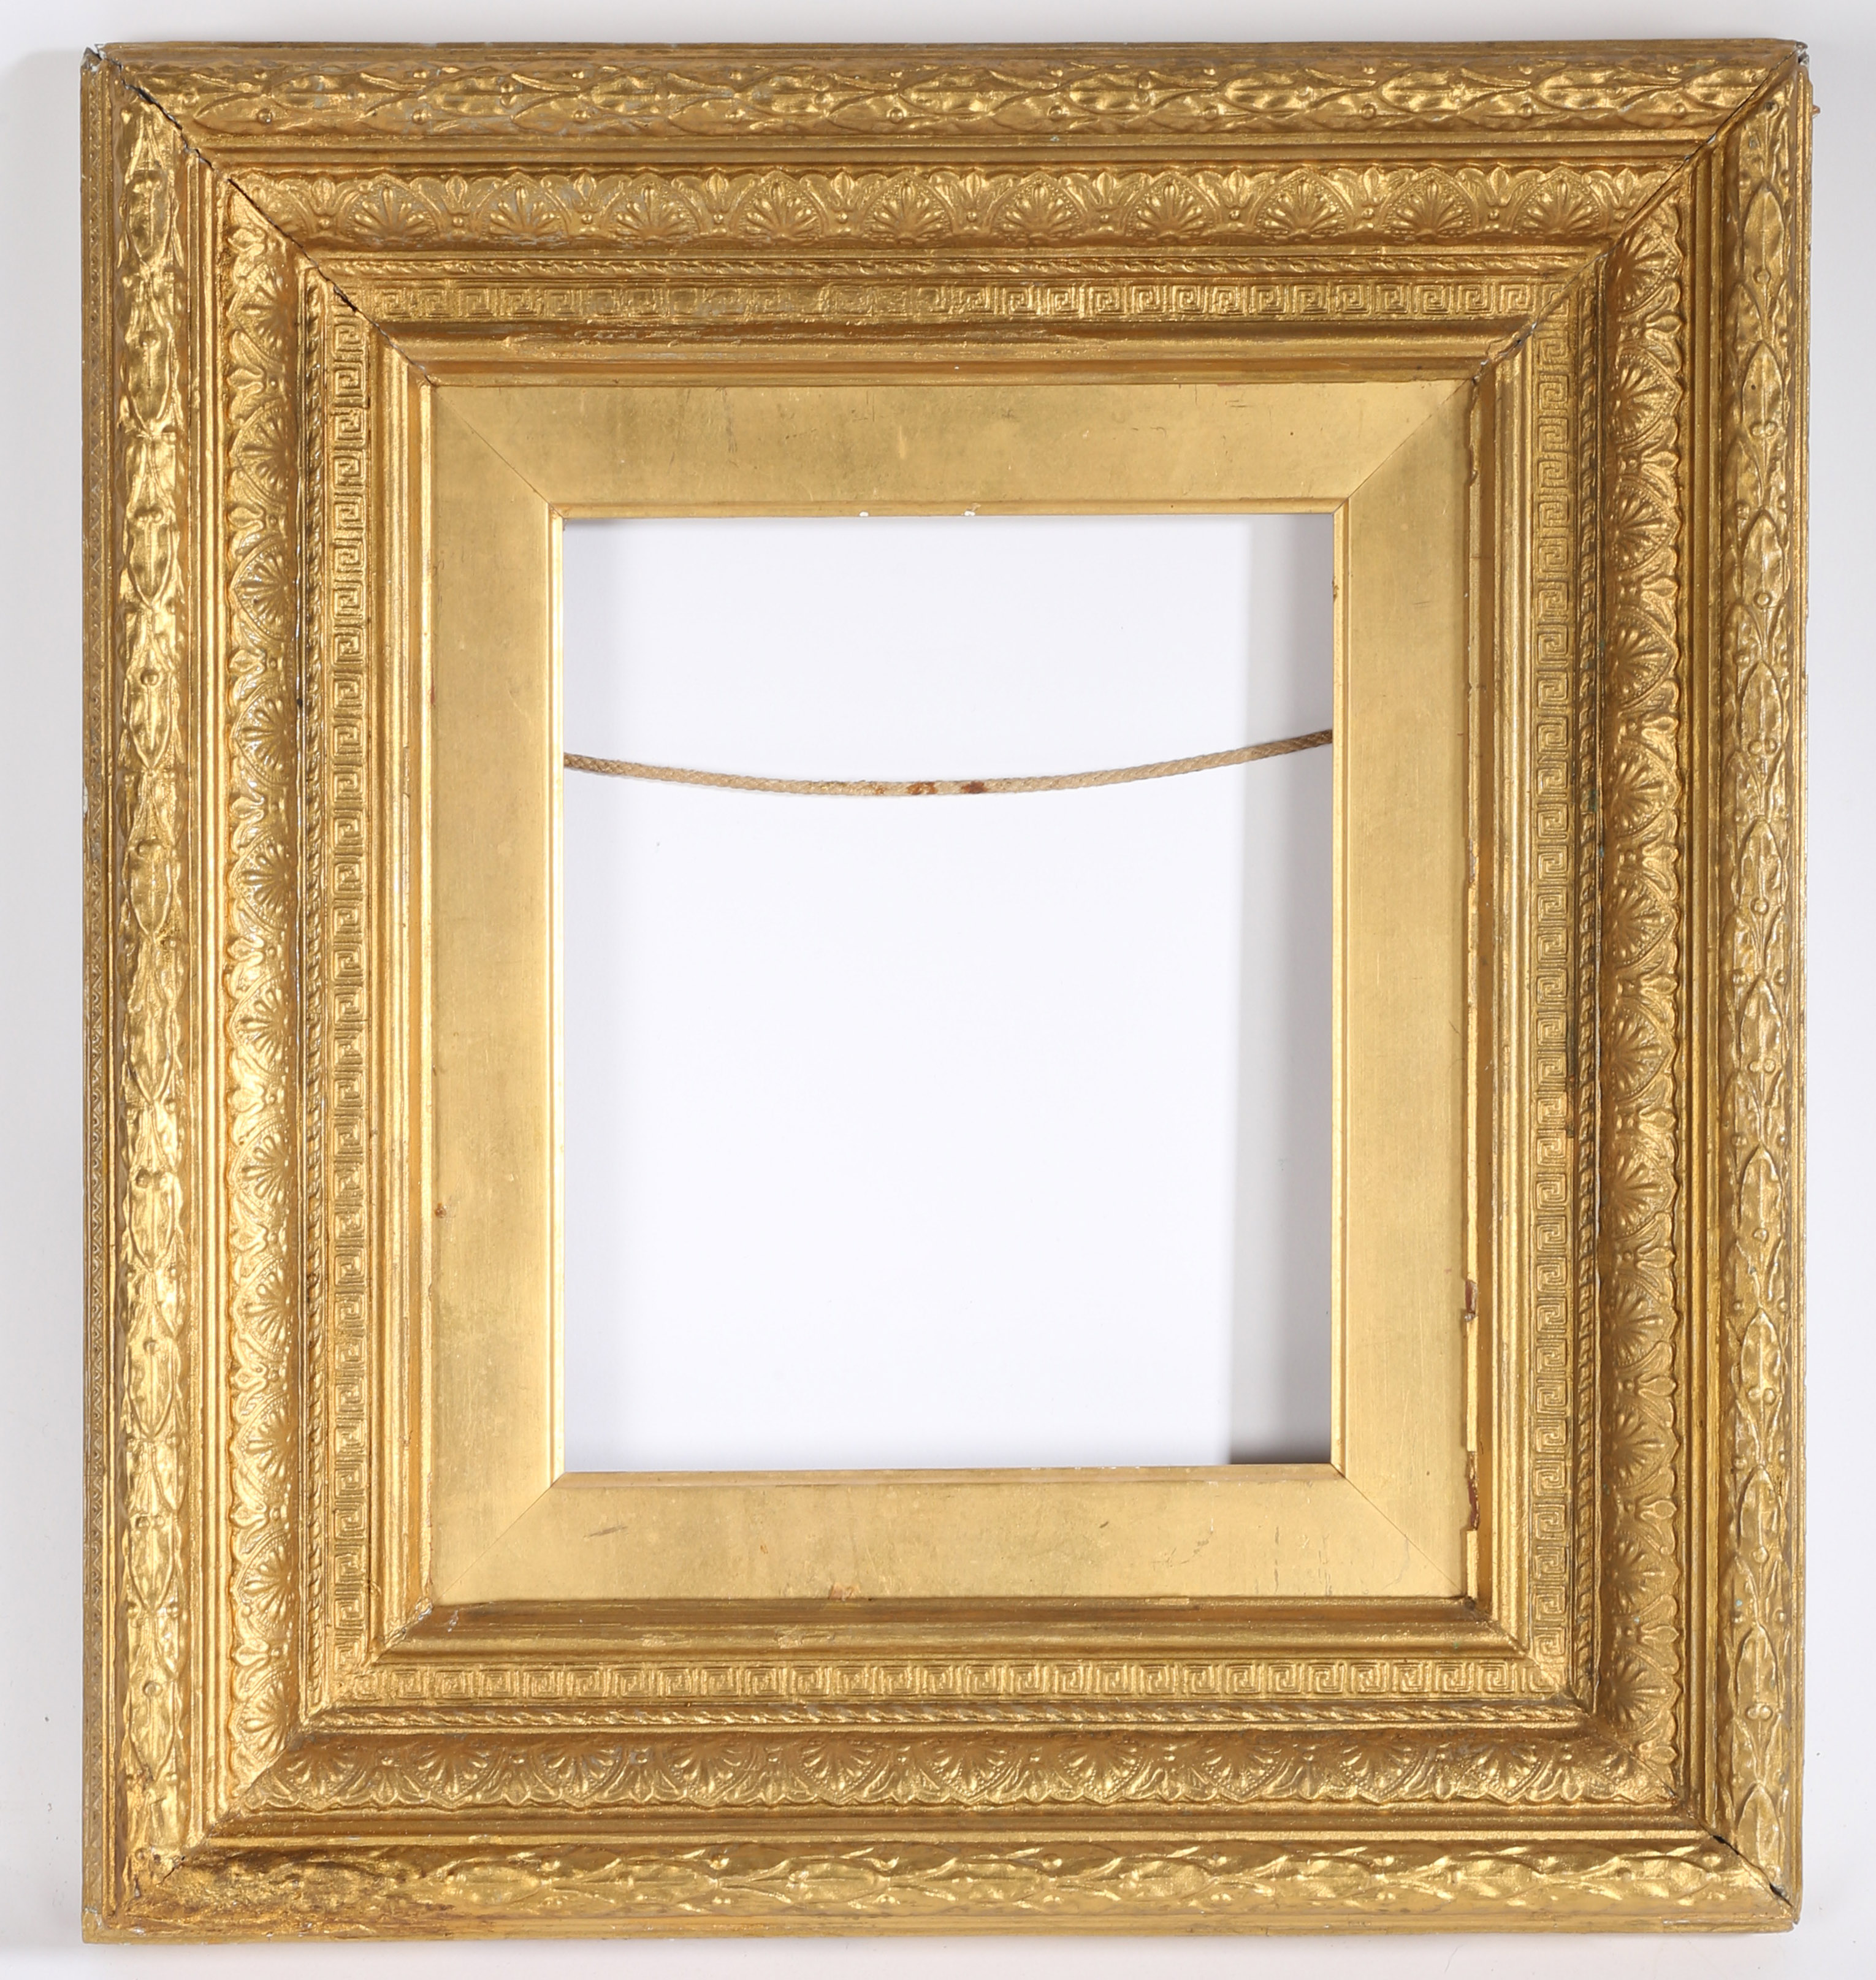 19th century heavy straight pattern picture frame - rebate size 10in x 8in - Image 3 of 3